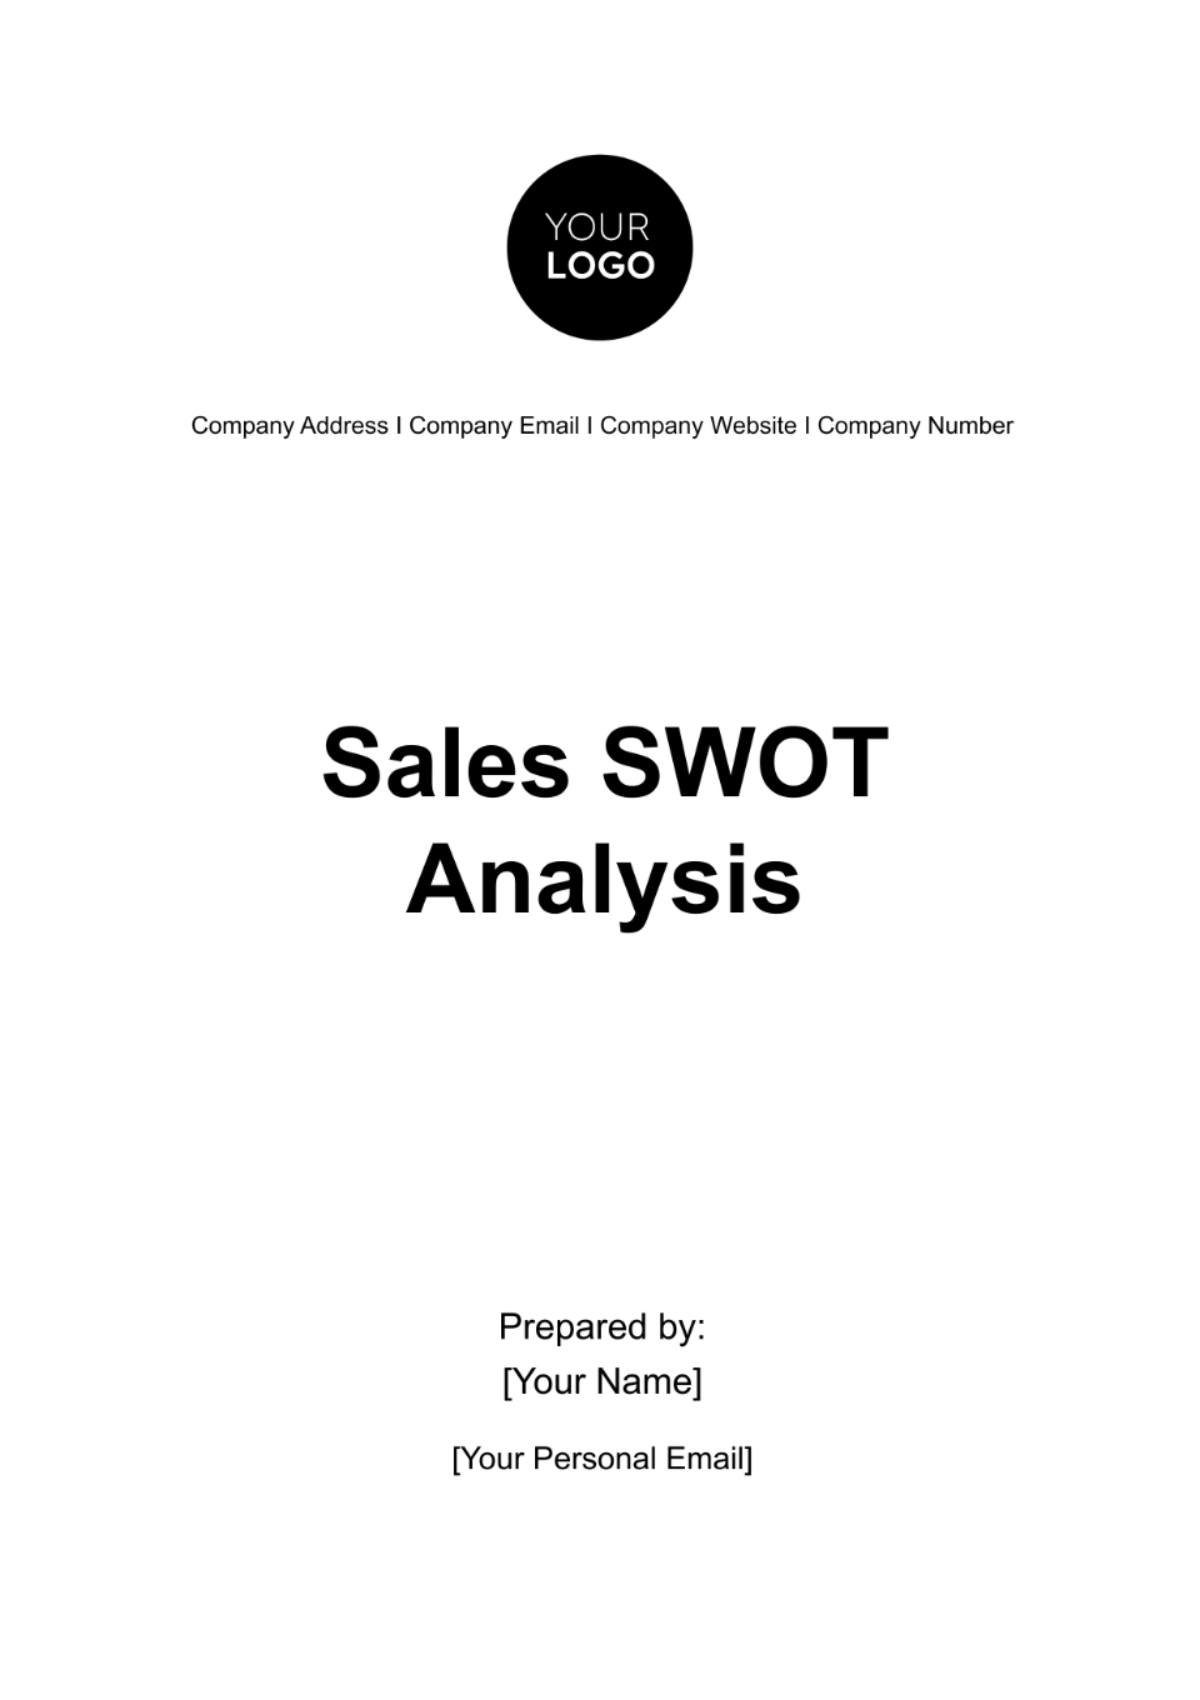 Free Sales SWOT Analysis Template